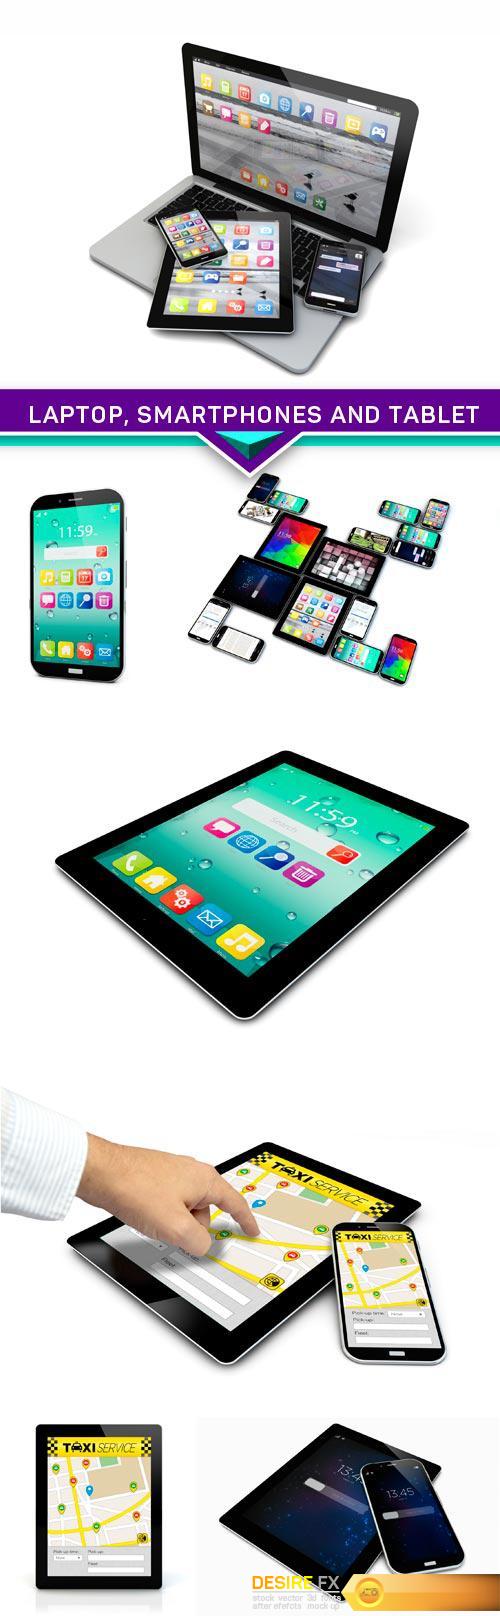 Laptop, smartphones and tablet 7X JPEG